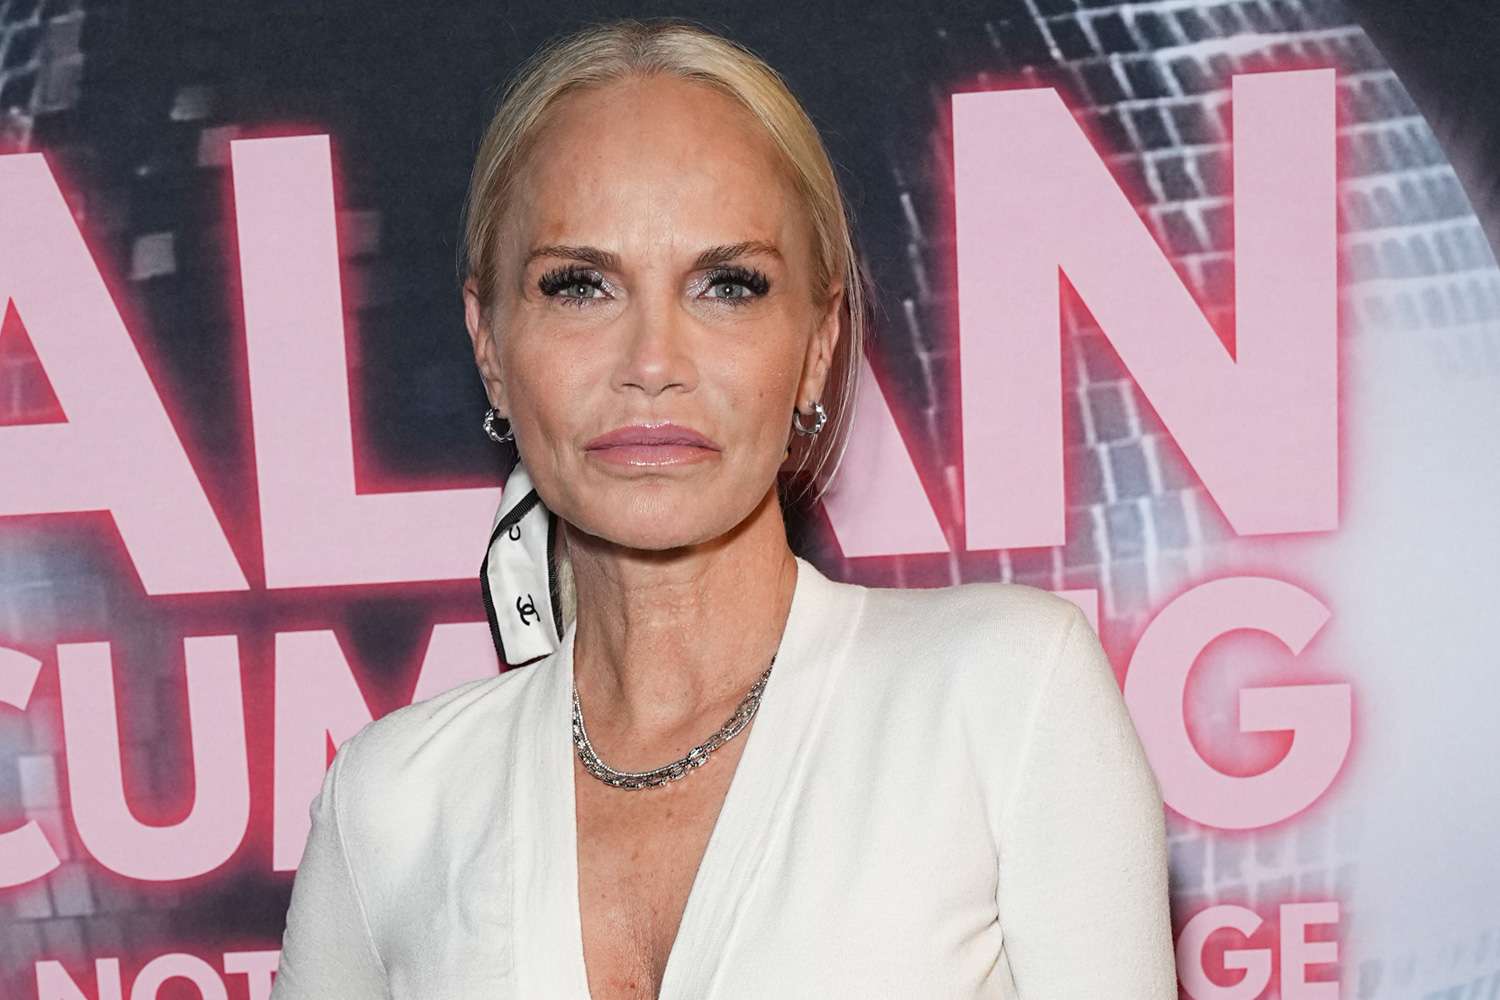 Kristin Chenoweth reveals she was 'severely abused' by an ex